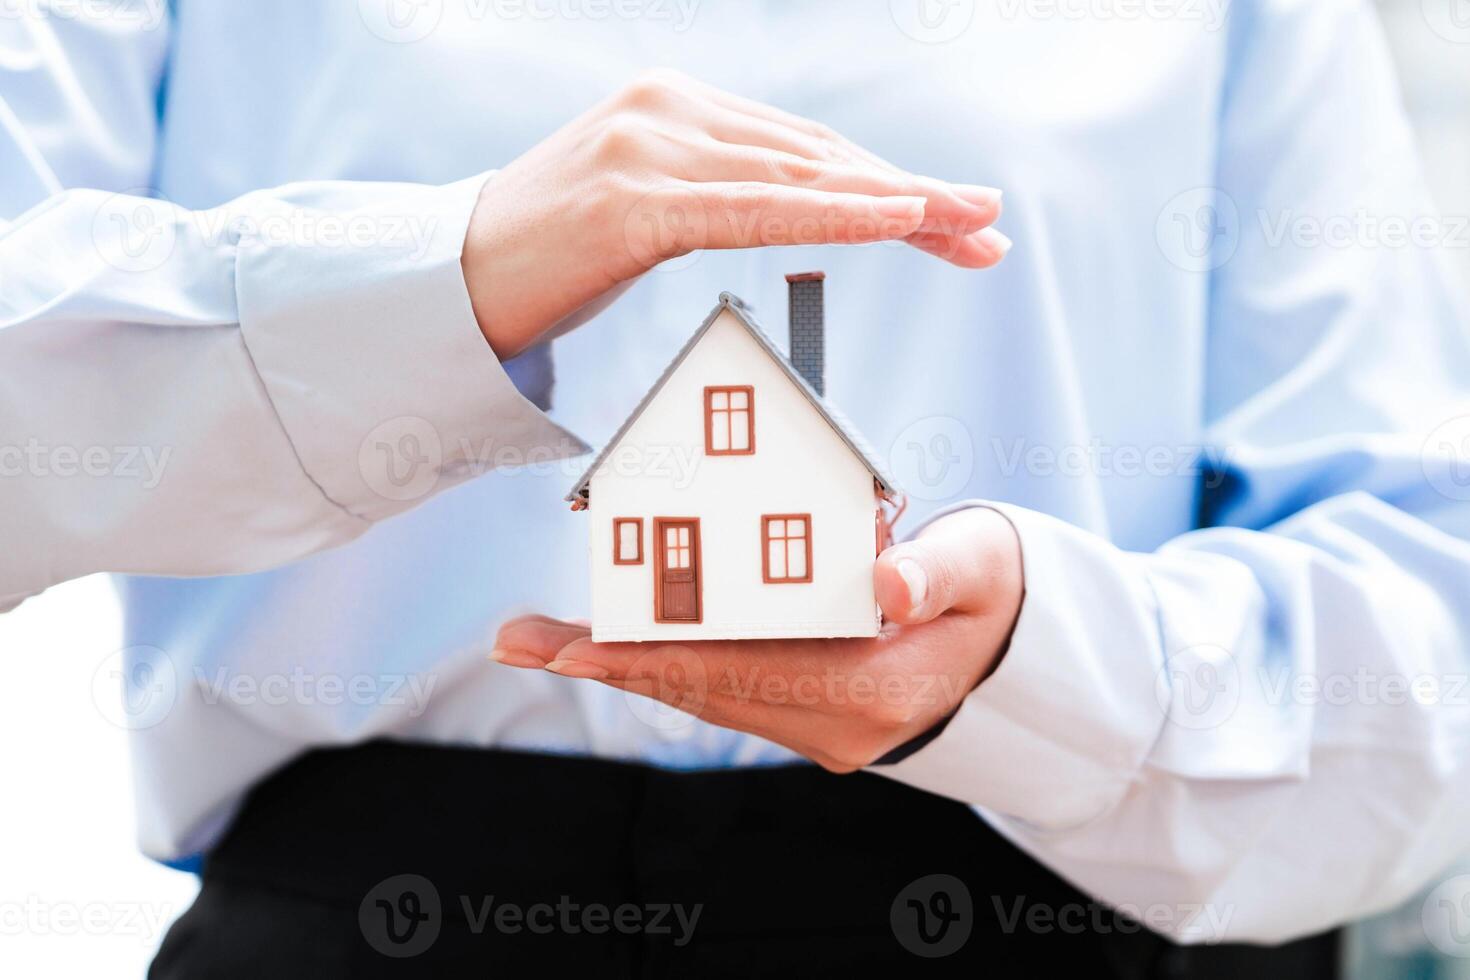 Hands holding a small house model, depicting safety and security in homeownership. photo